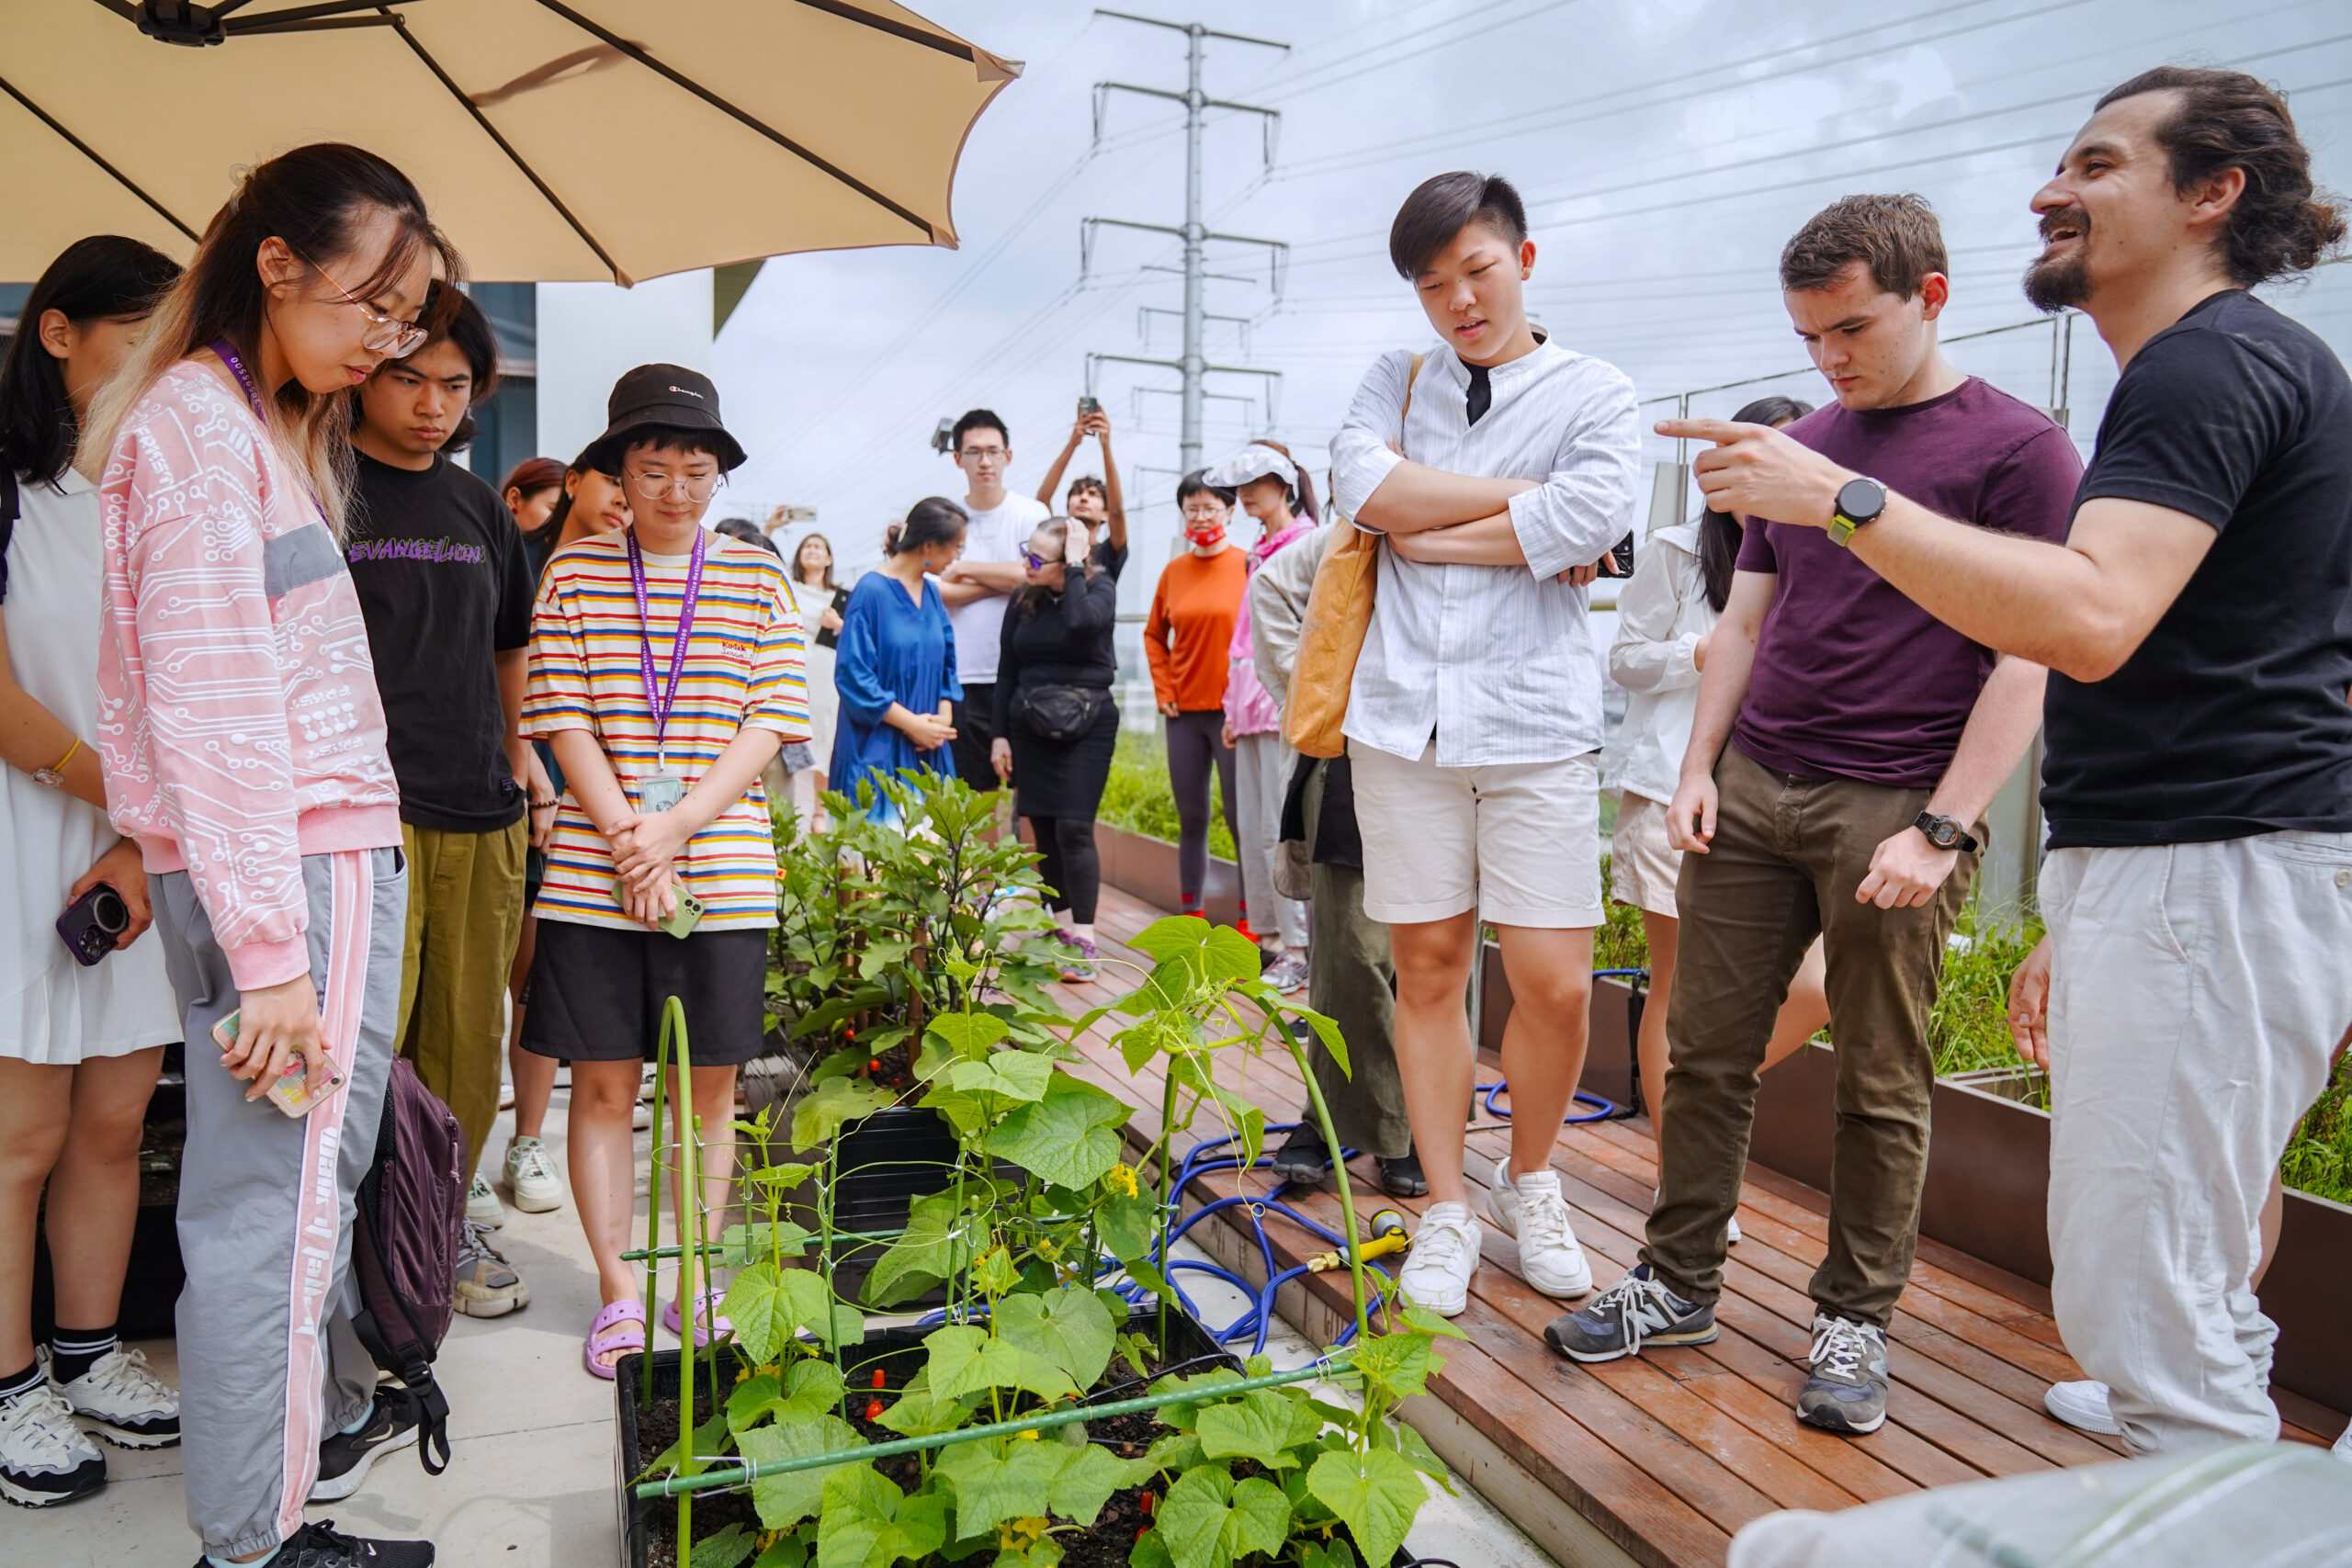 A group of people gather around a rooftop garden, attentively listening to a guide explaining the plants.